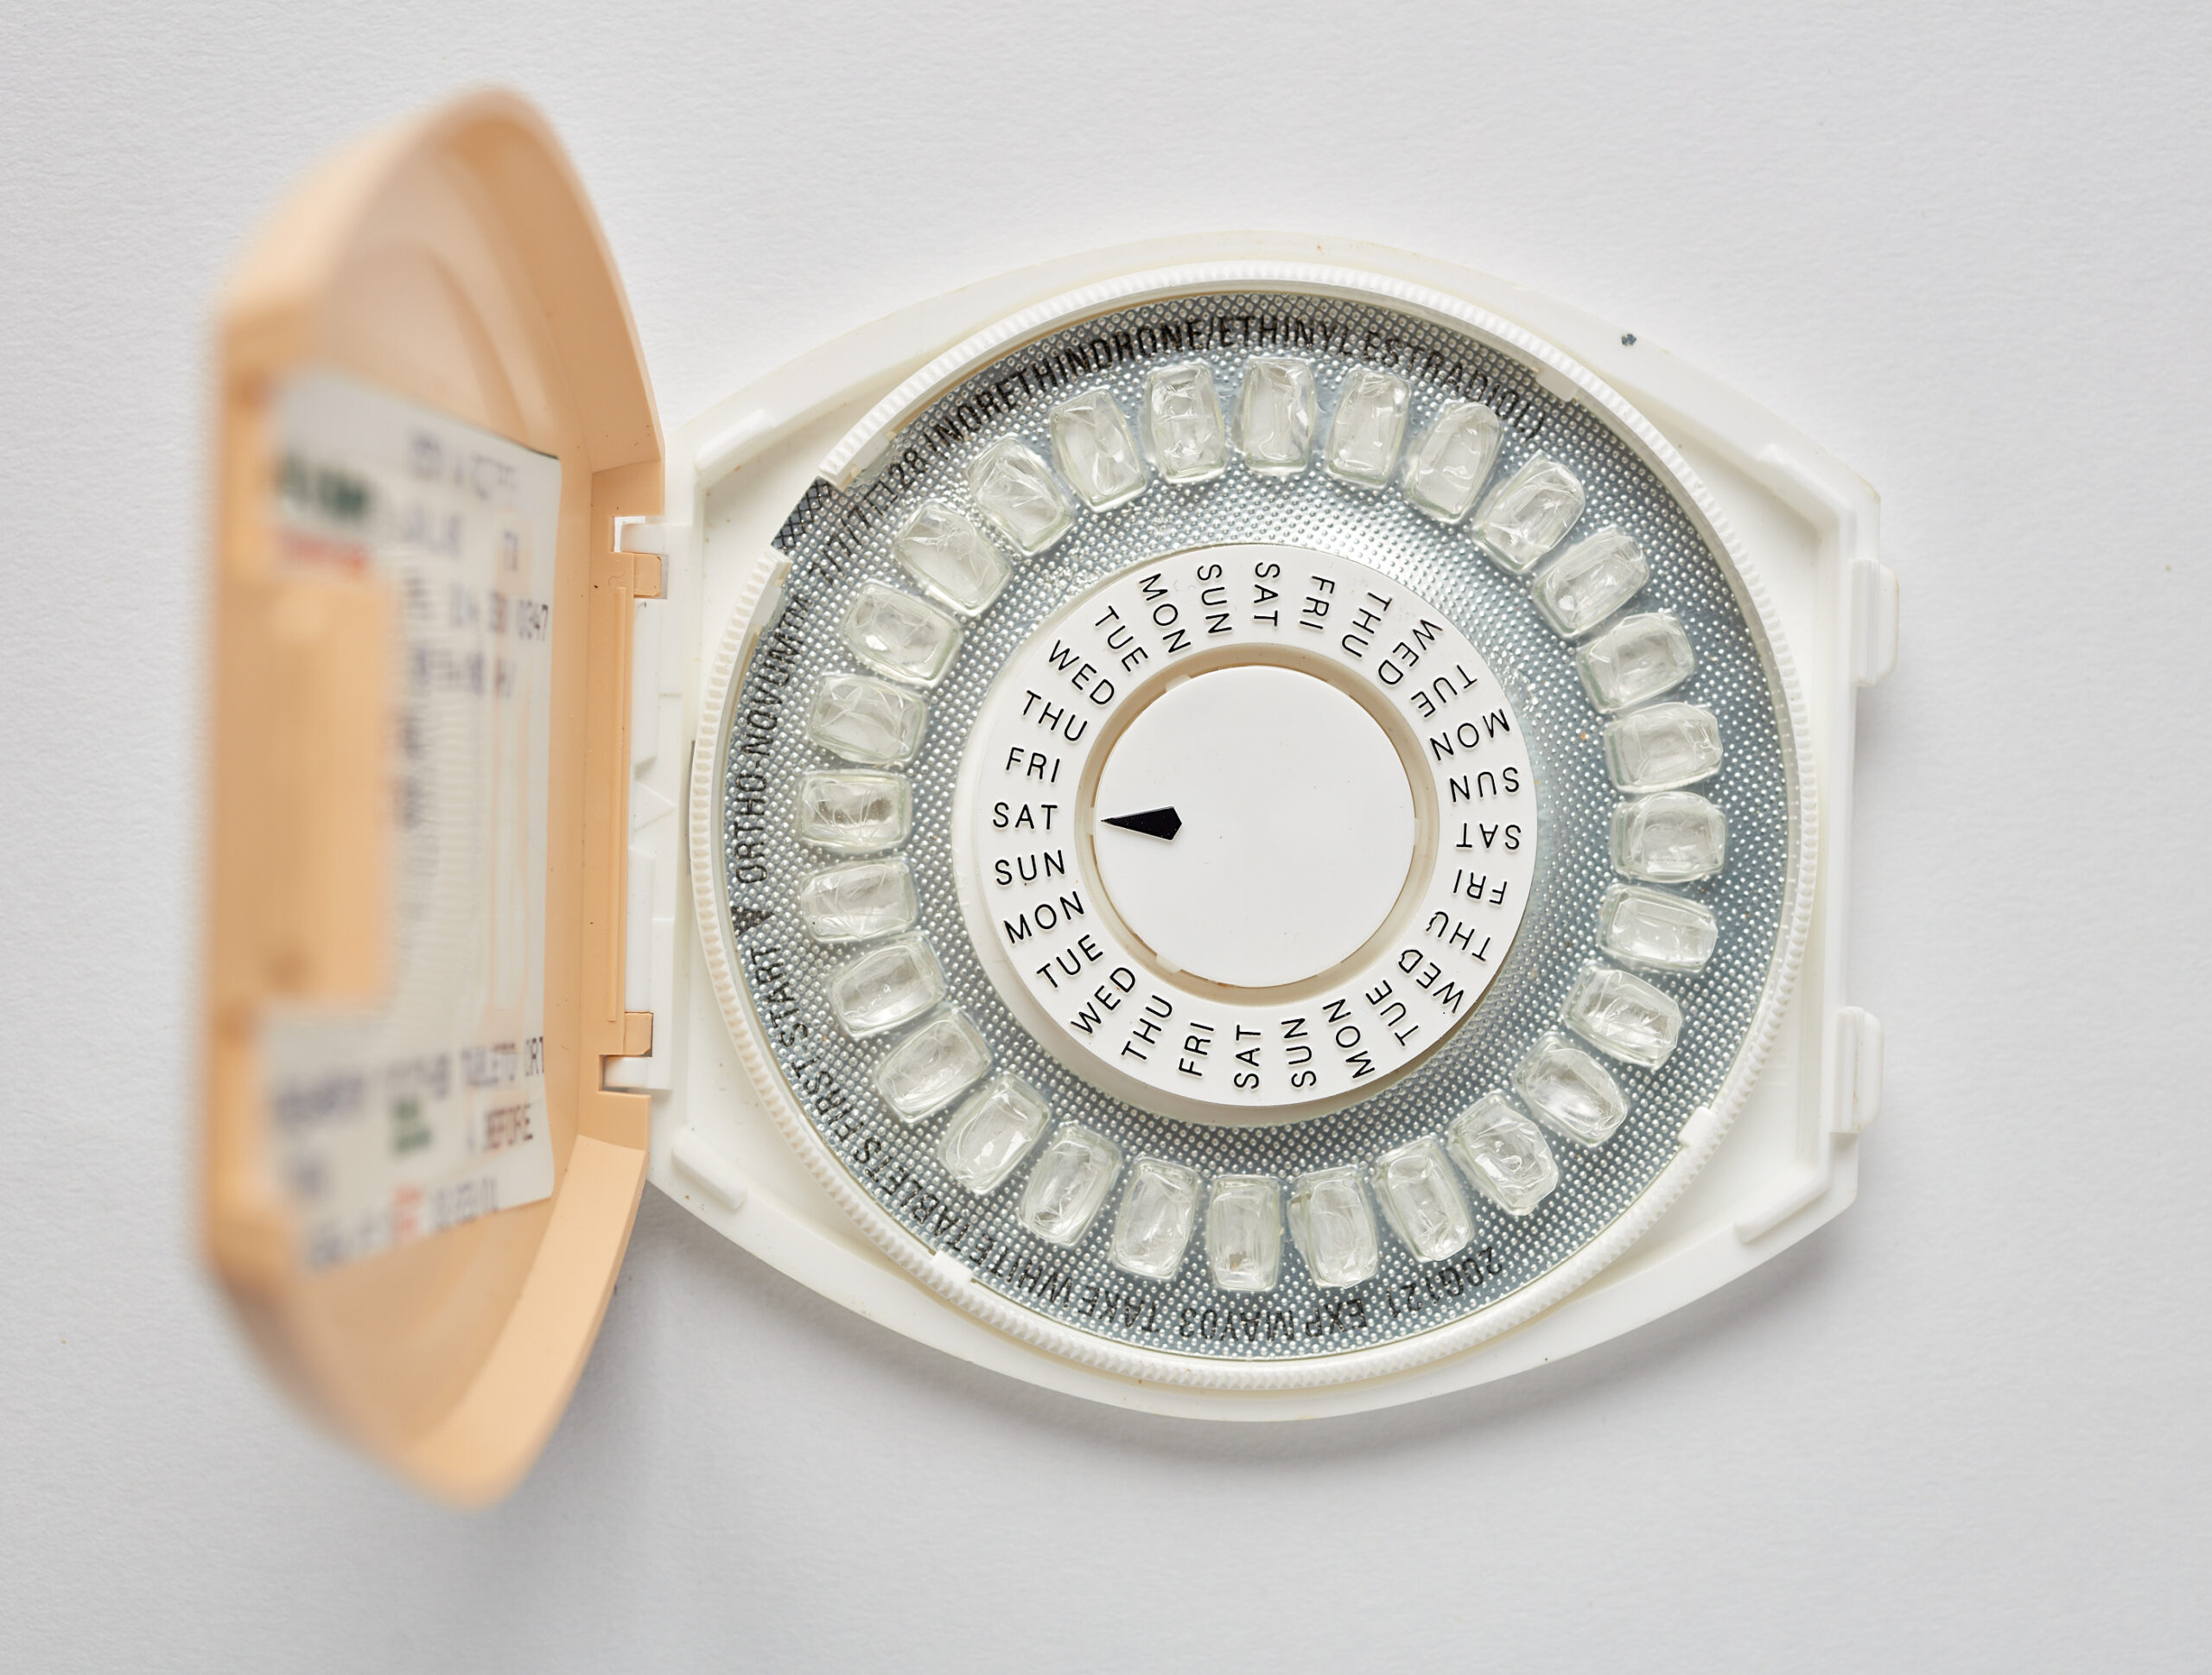 image of a contemporary plastic oral contraceptive dial pack